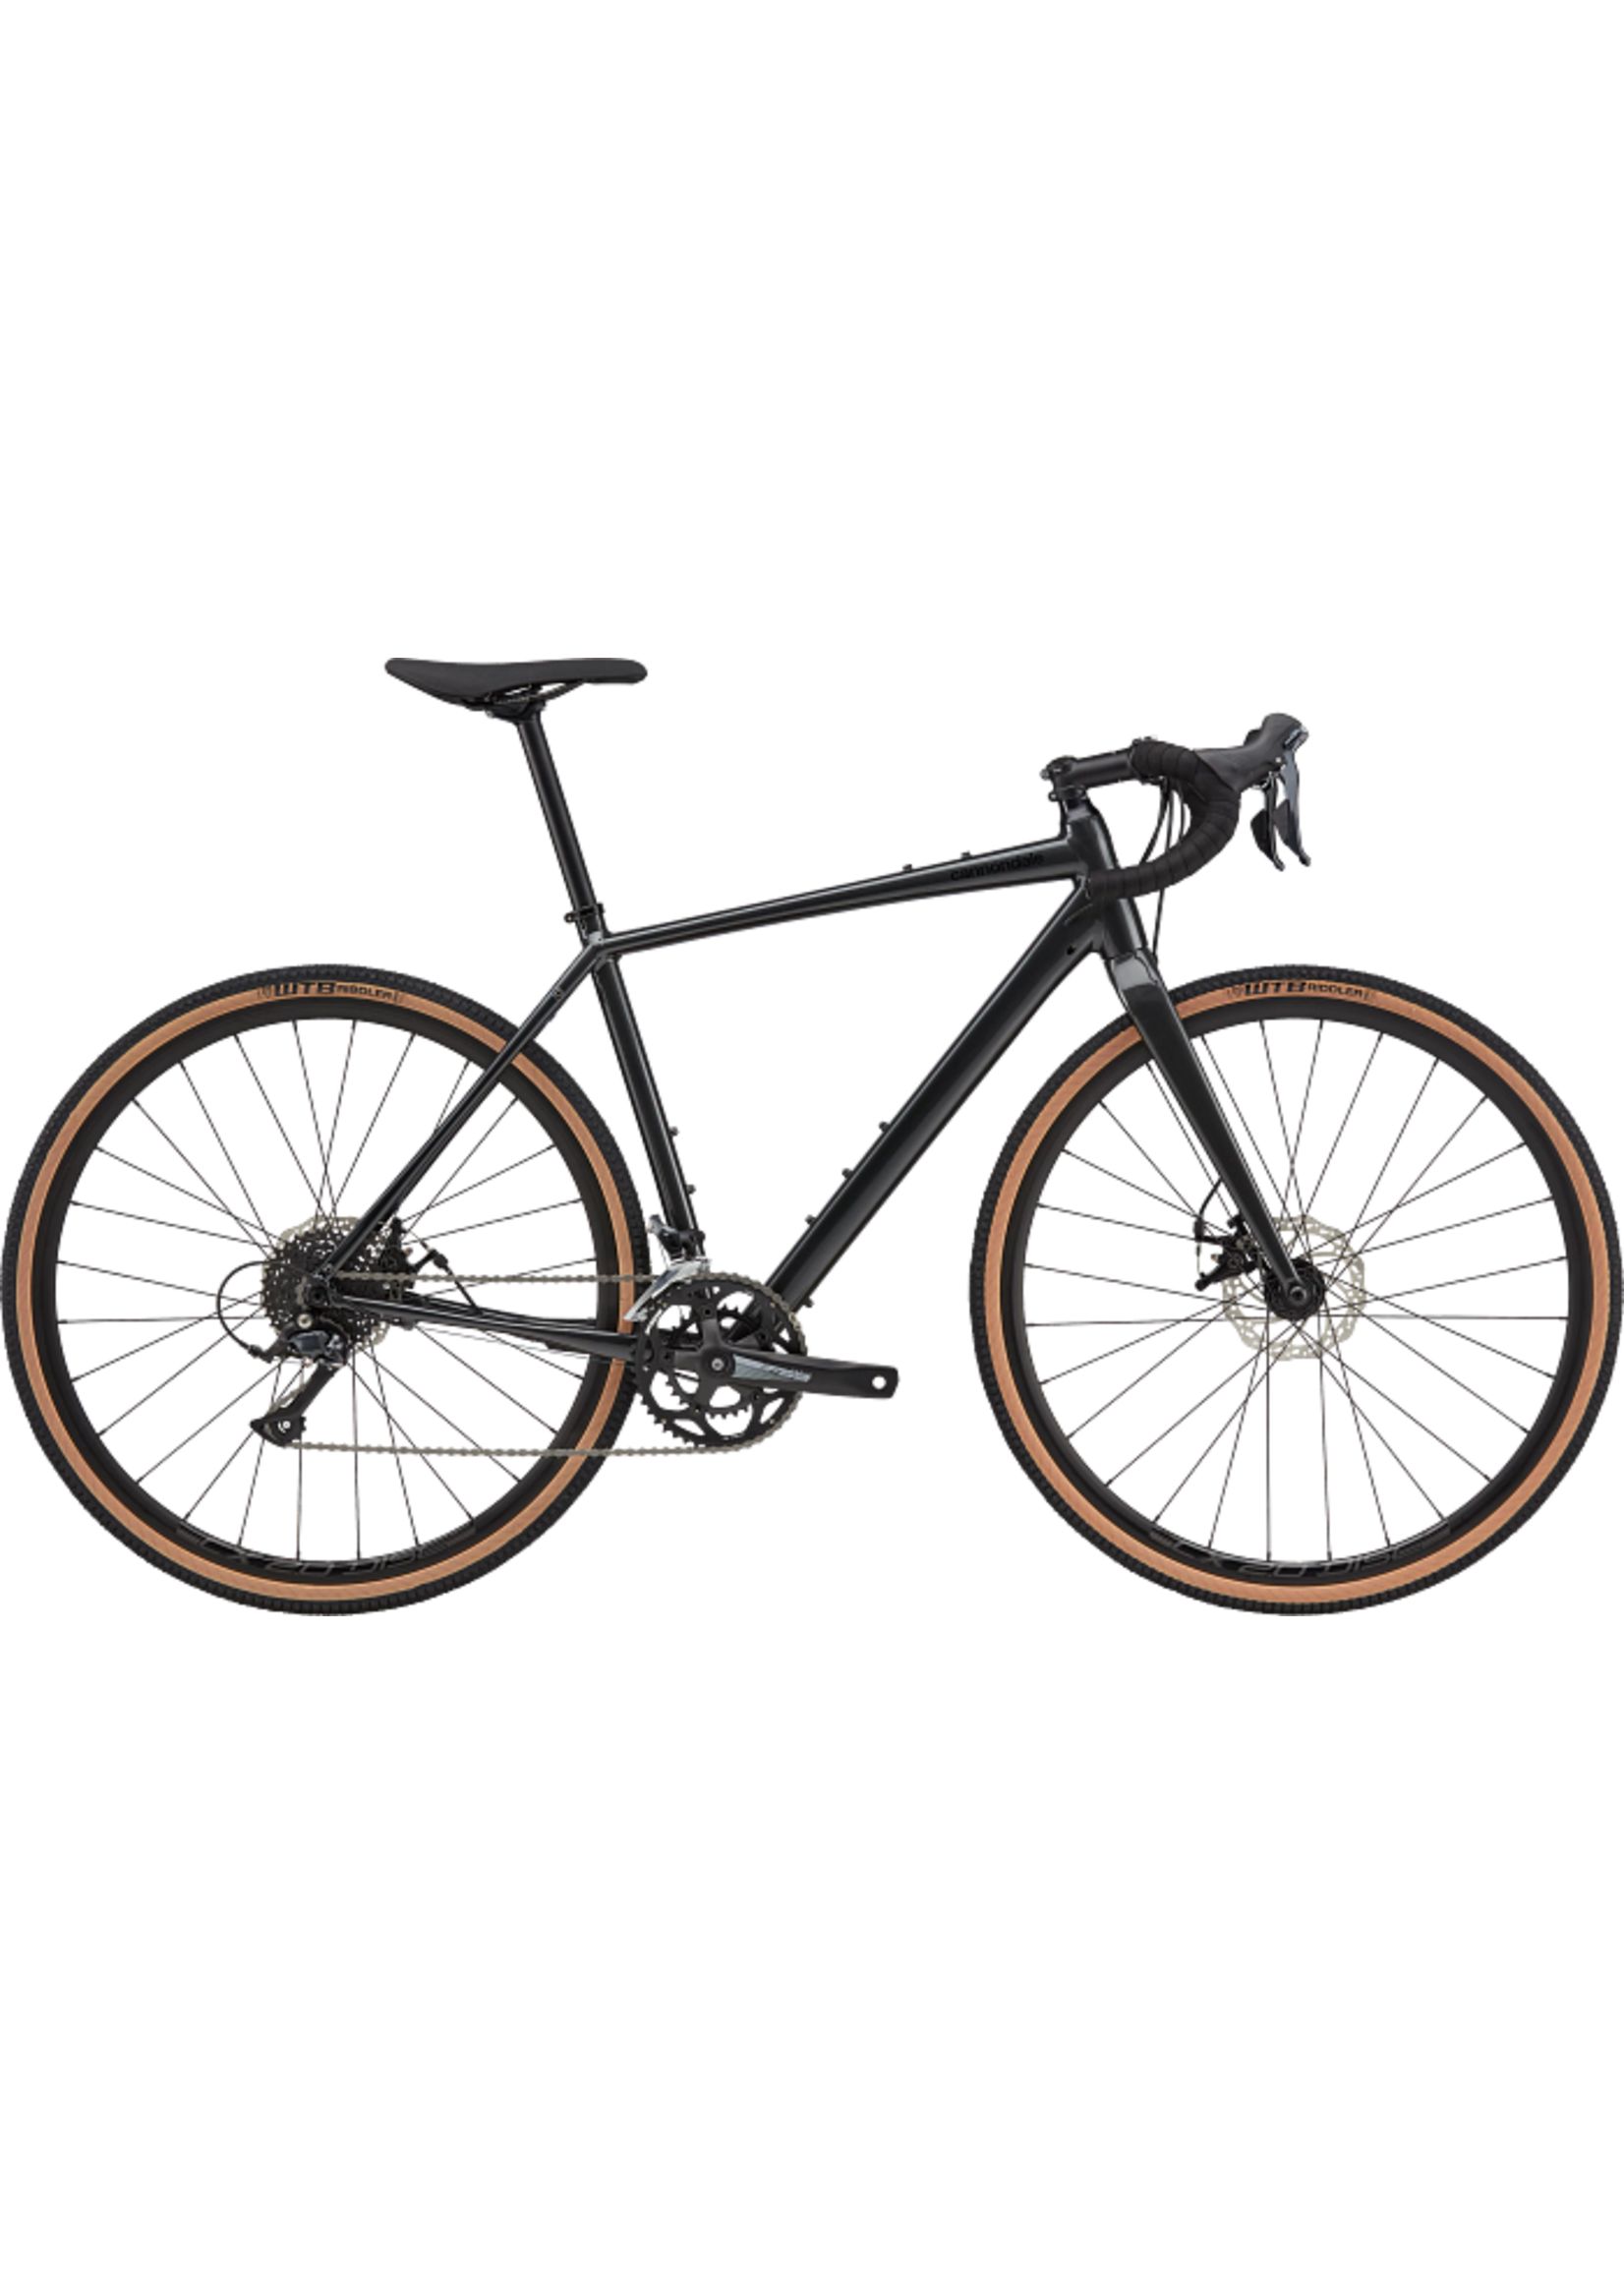 CANNONDALE TOPSTONE 3 GRAY LARGE 21